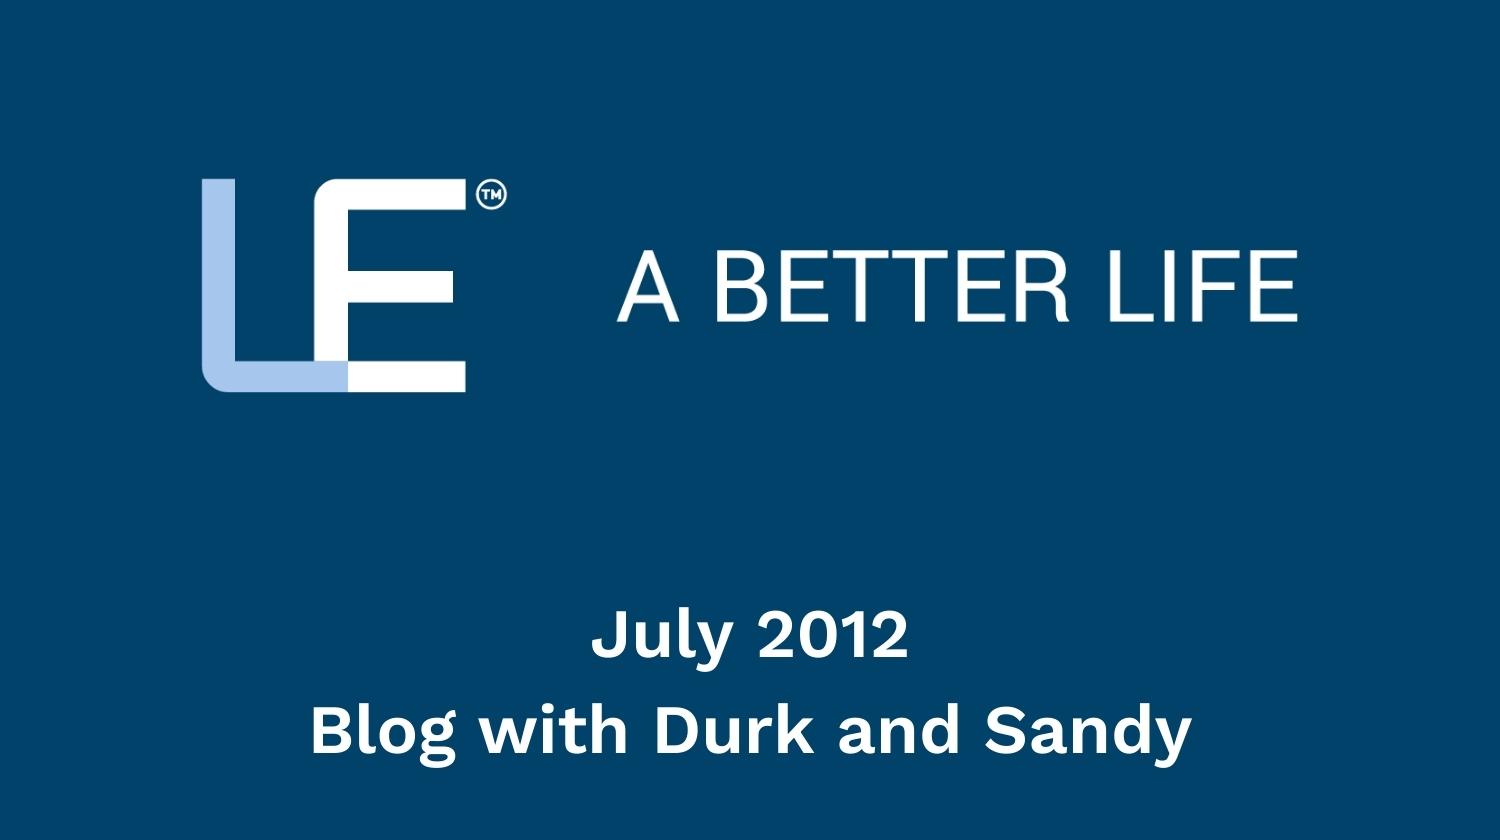 July 2012 Blog with Durk and Sandy